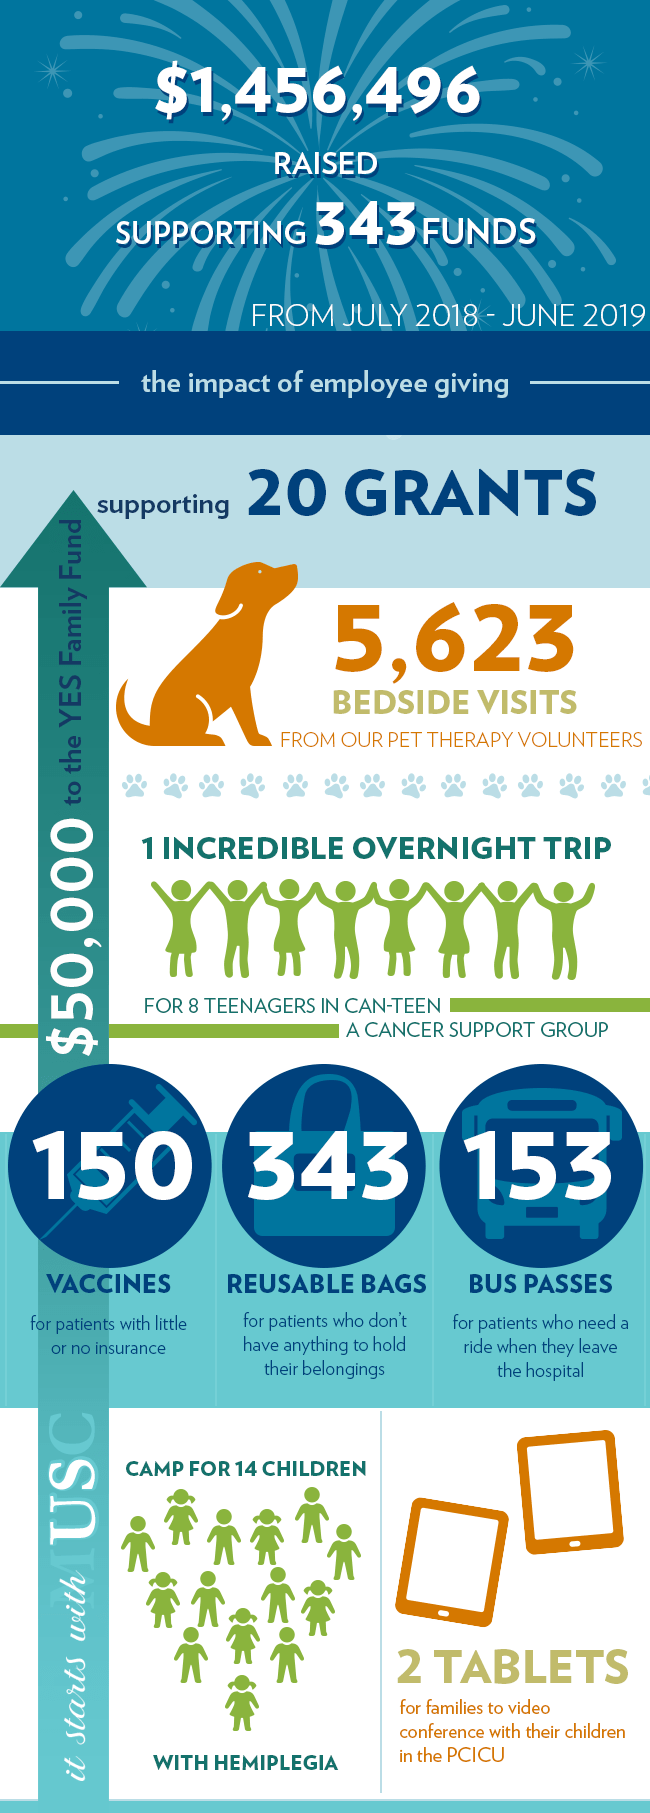 $1,456,496 raised in FY2018-19. 343 funds supported. $50,000 to the YES Family Fund supporting 20 grants. 1 incredible overnight trip for 8 teenagers in Can-Teen, a cancer support group 5,623 bedside visits from our pet therapy volunteers. 150 vaccines for patients with little or no insurance. 2 tablets for families to video conference with their children in the PCICU. 153 CARTA bus passes for patients who need a ride when they leave the hospital.  343 reusable bags for patients who don’t have anything to hold their belongings. Camp for 14 children with hemiplegia